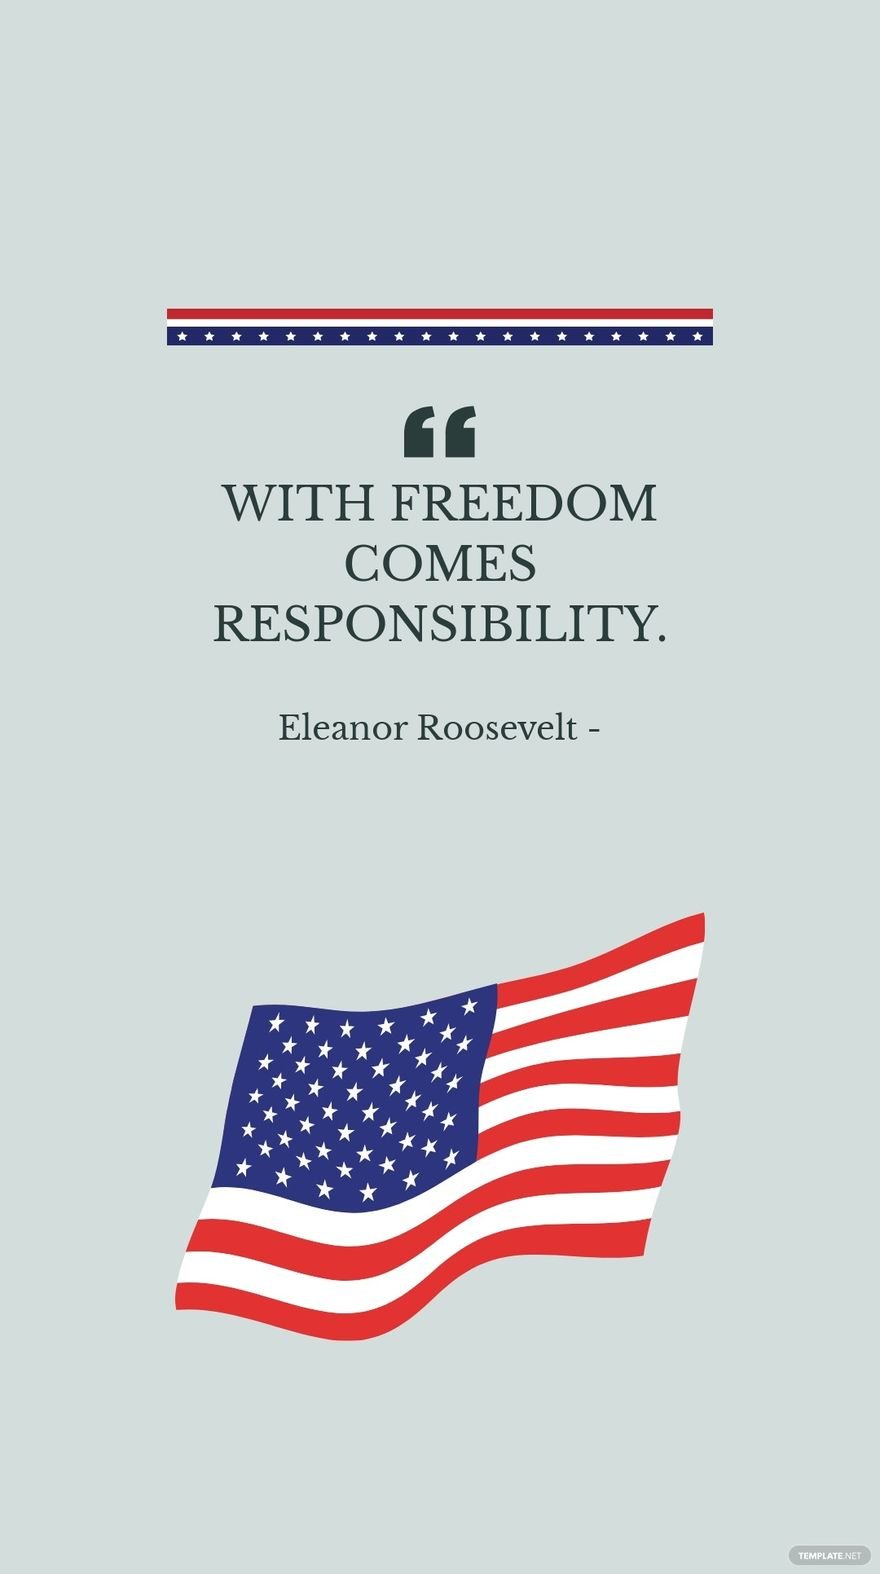 Free Eleanor Roosevelt - With freedom comes responsibility. in JPG